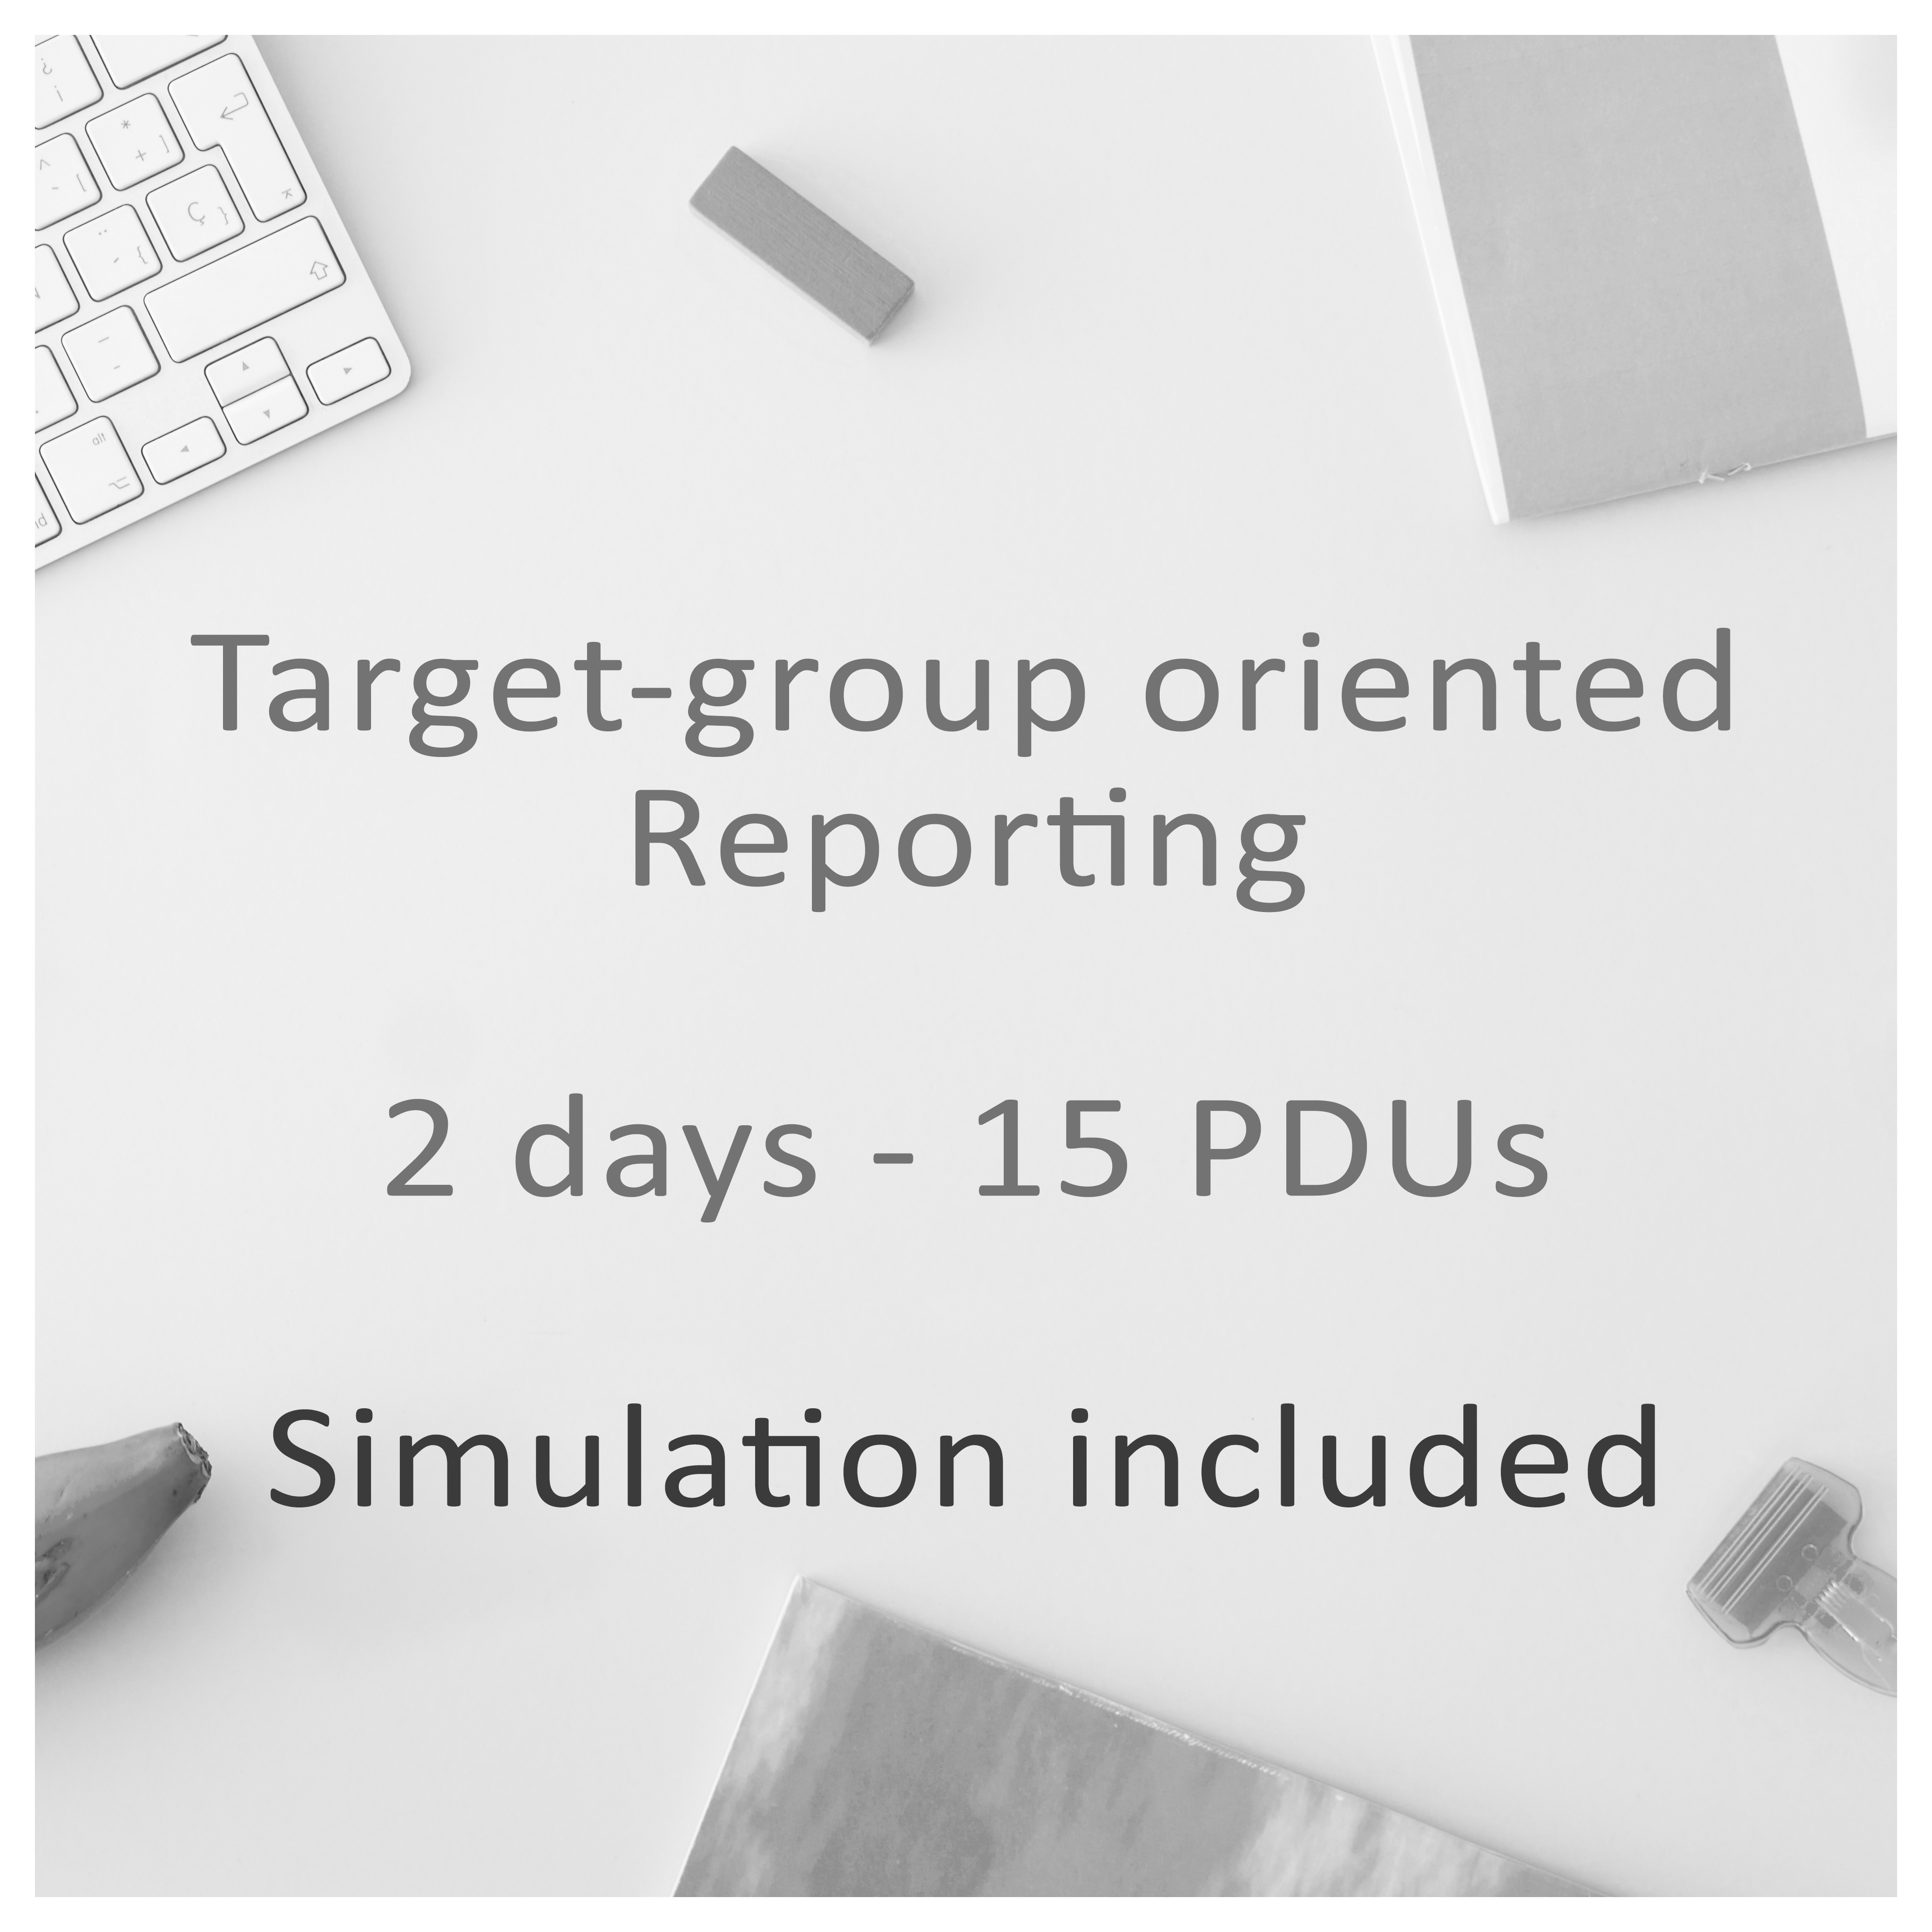 Target-group oriented Reporting